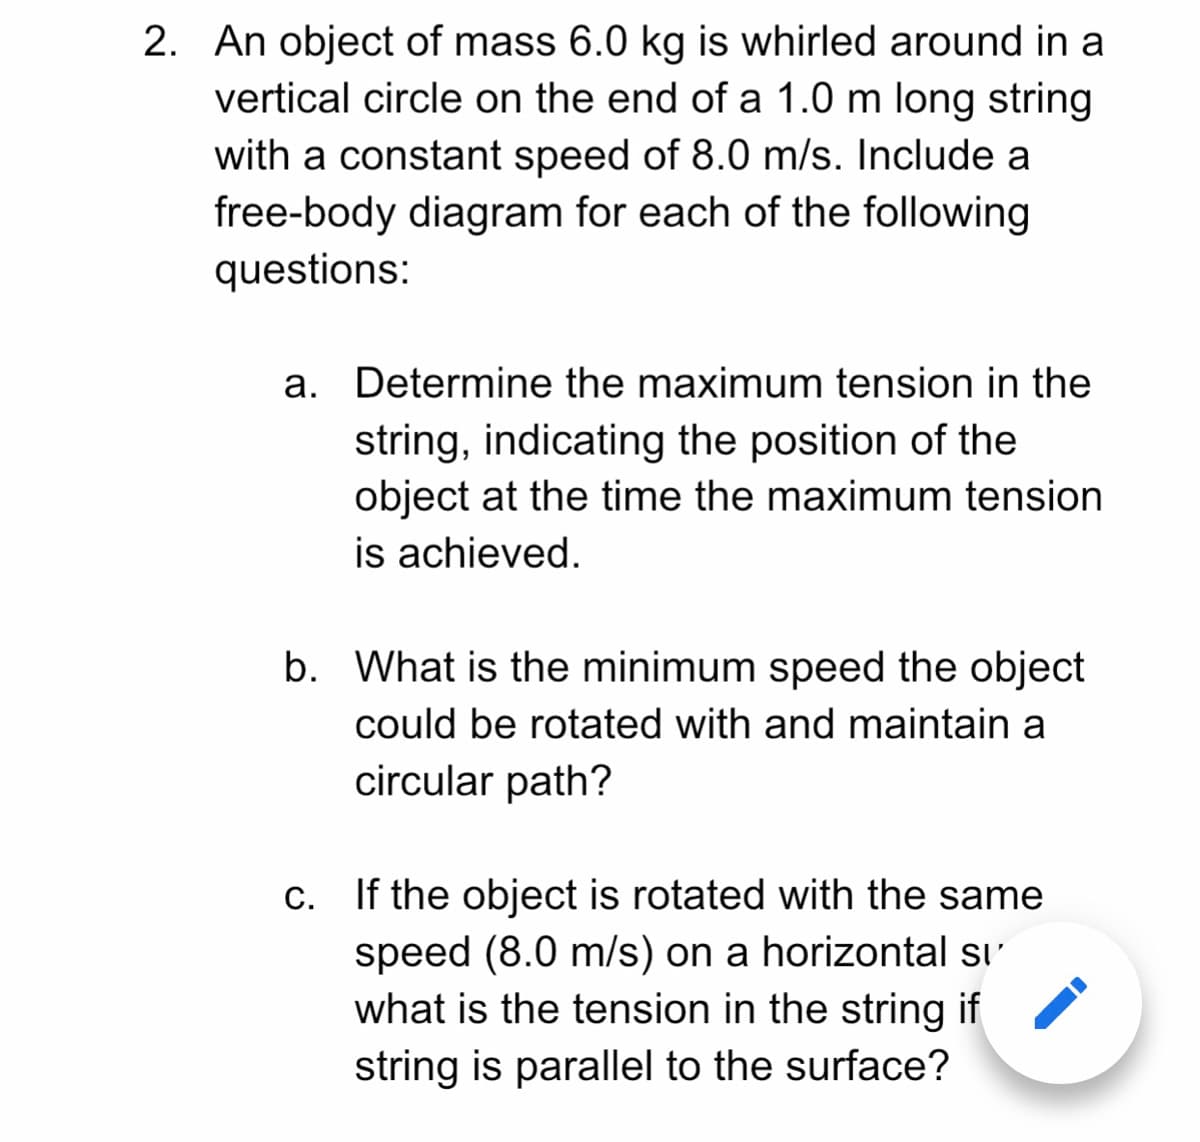 2. An object of mass 6.0 kg is whirled around in a
vertical circle on the end of a 1.0 m long string
with a constant speed of 8.0 m/s. Include a
free-body diagram for each of the following
questions:
a. Determine the maximum tension in the
string, indicating the position of the
object at the time the maximum tension
is achieved.
b. What is the minimum speed the object
could be rotated with and maintain a
circular path?
C. If the object is rotated with the same
speed (8.0 m/s) on a horizontal sı'
what is the tension in the string if
string is parallel to the surface?
